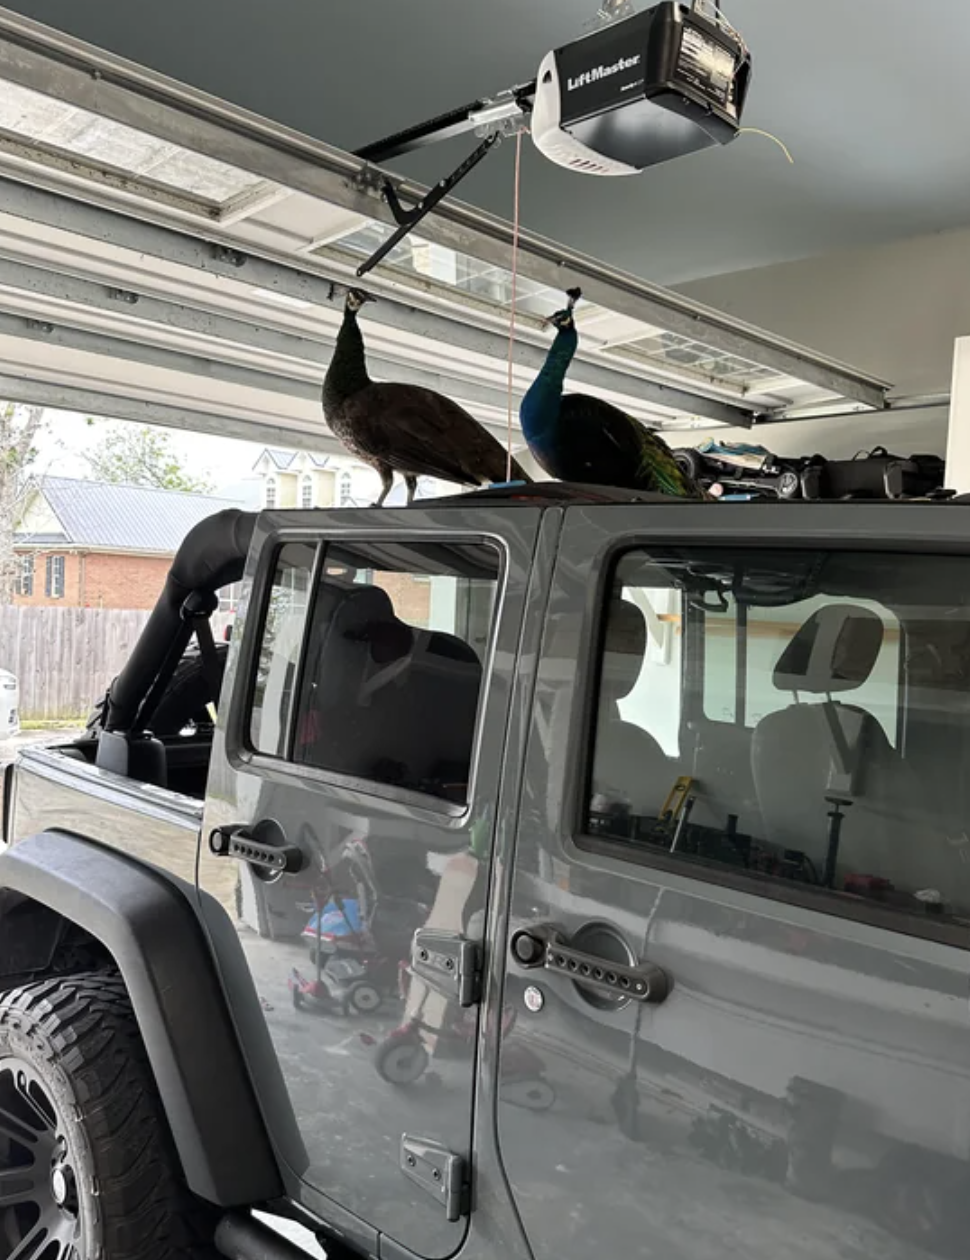 two peacocks on top of a jeep